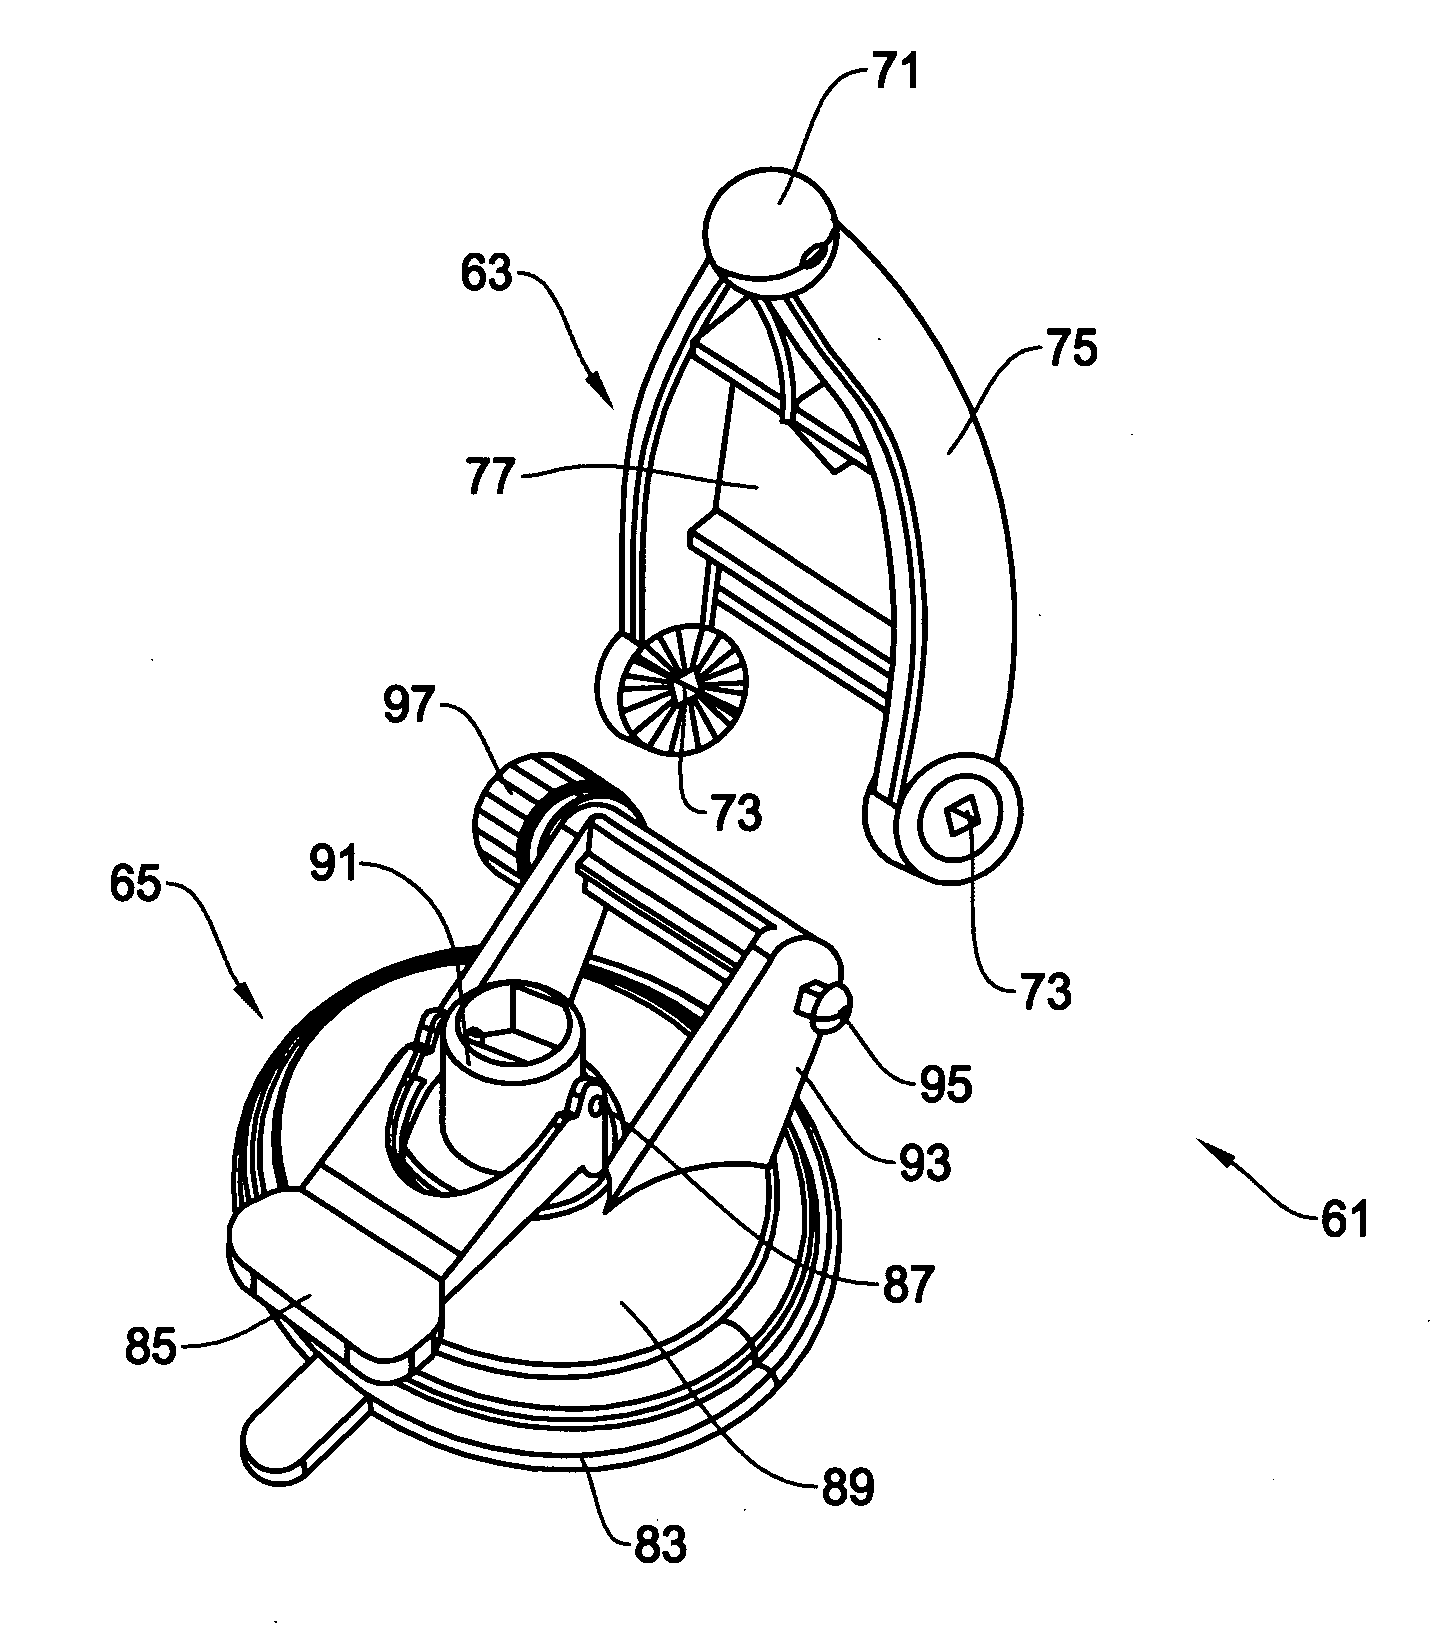 Structure and mechanism of windshield mount and pedestal for portable electronics device